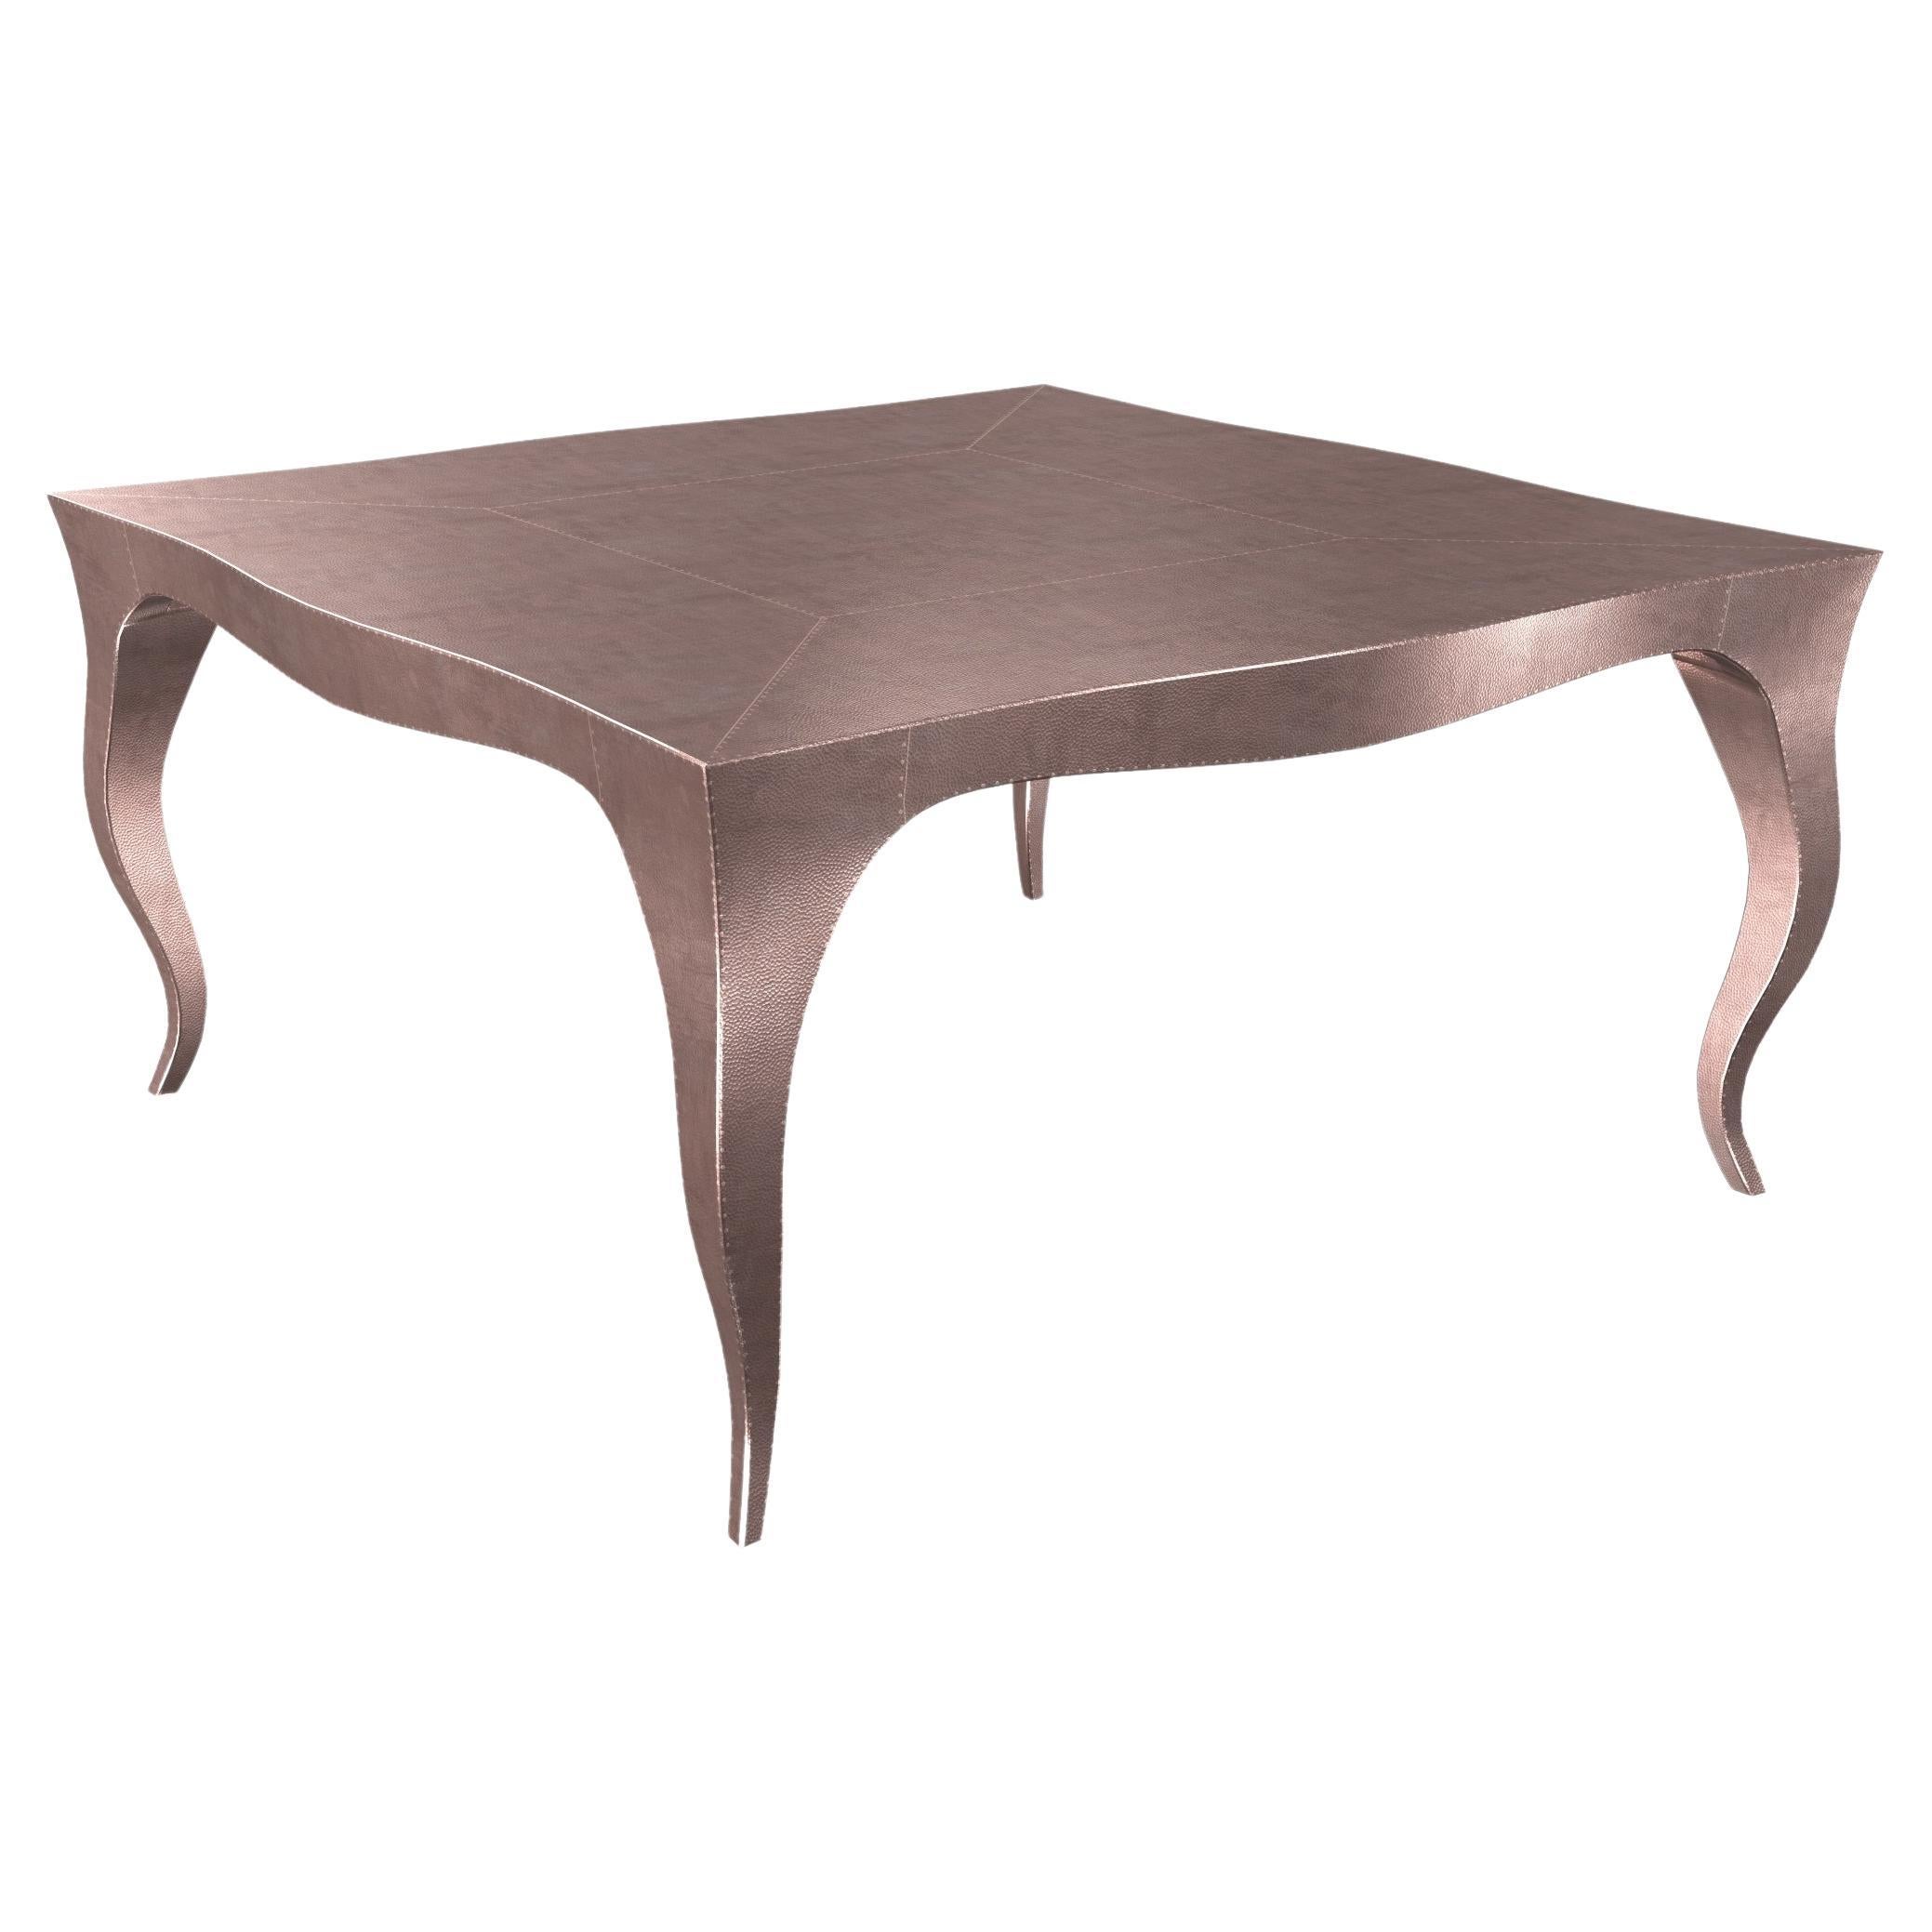 Louise Art Deco Game Tables Mid. Hammered Copper 18.5x18.5x10 inch  For Sale